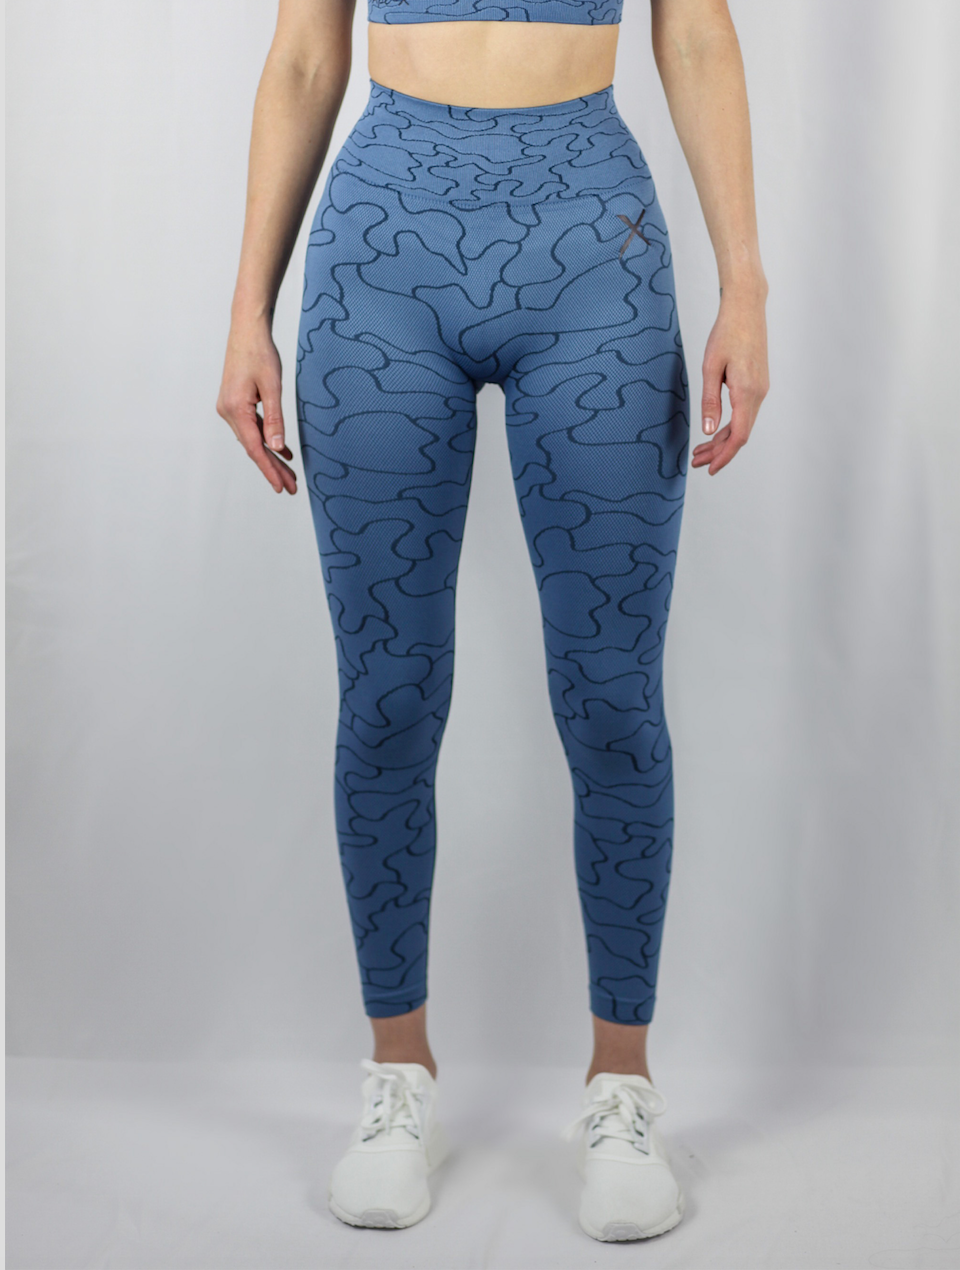 Vogo Athletica Blue and White Floral Crop Leggings Size M - $11 - From  Samantha